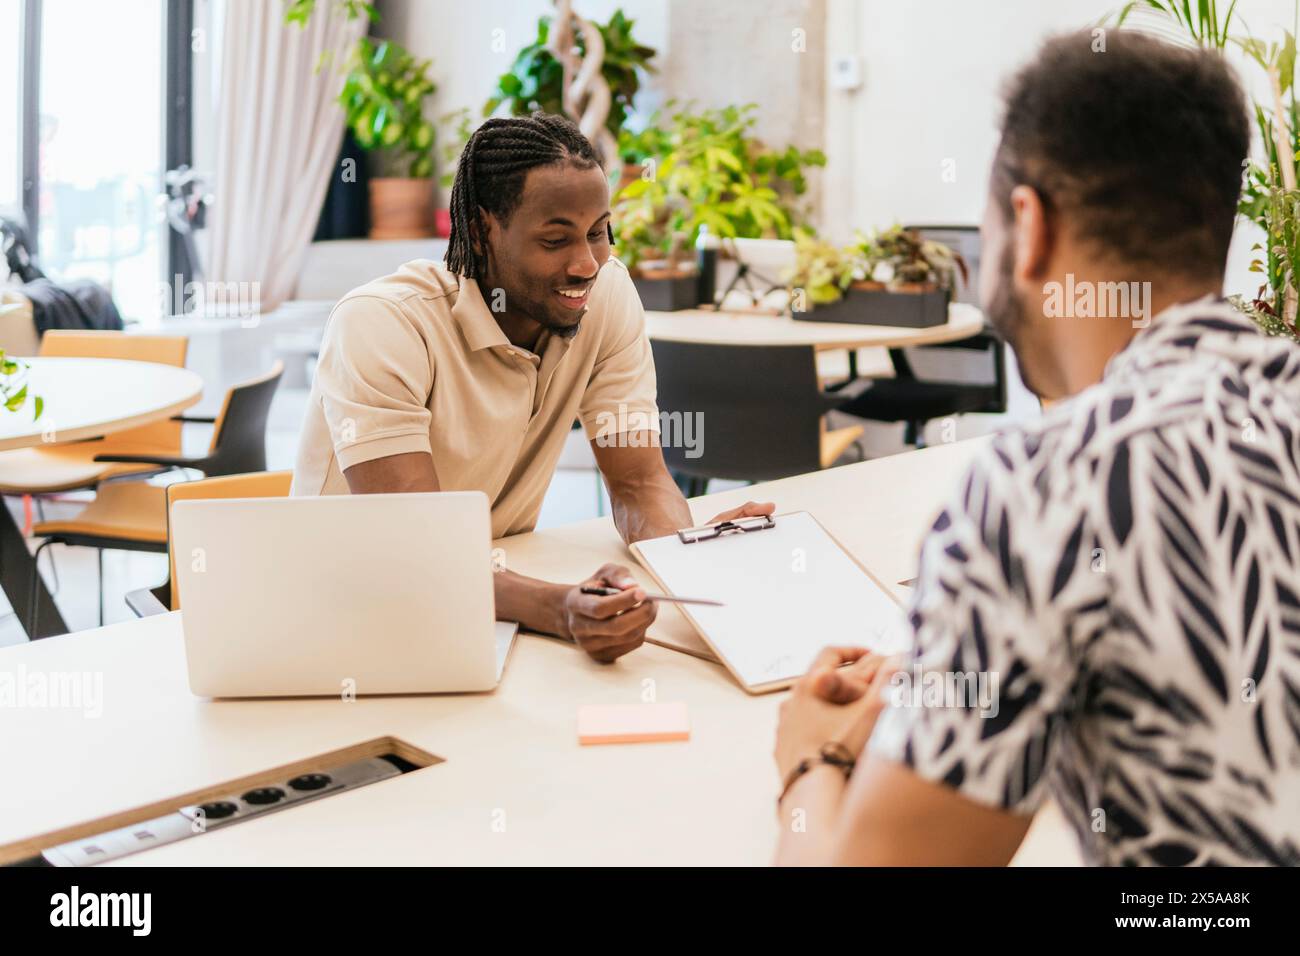 Two professionals engaging in a friendly discussion at a well-lit coworking space, with laptops and note-taking materials at hand Stock Photo